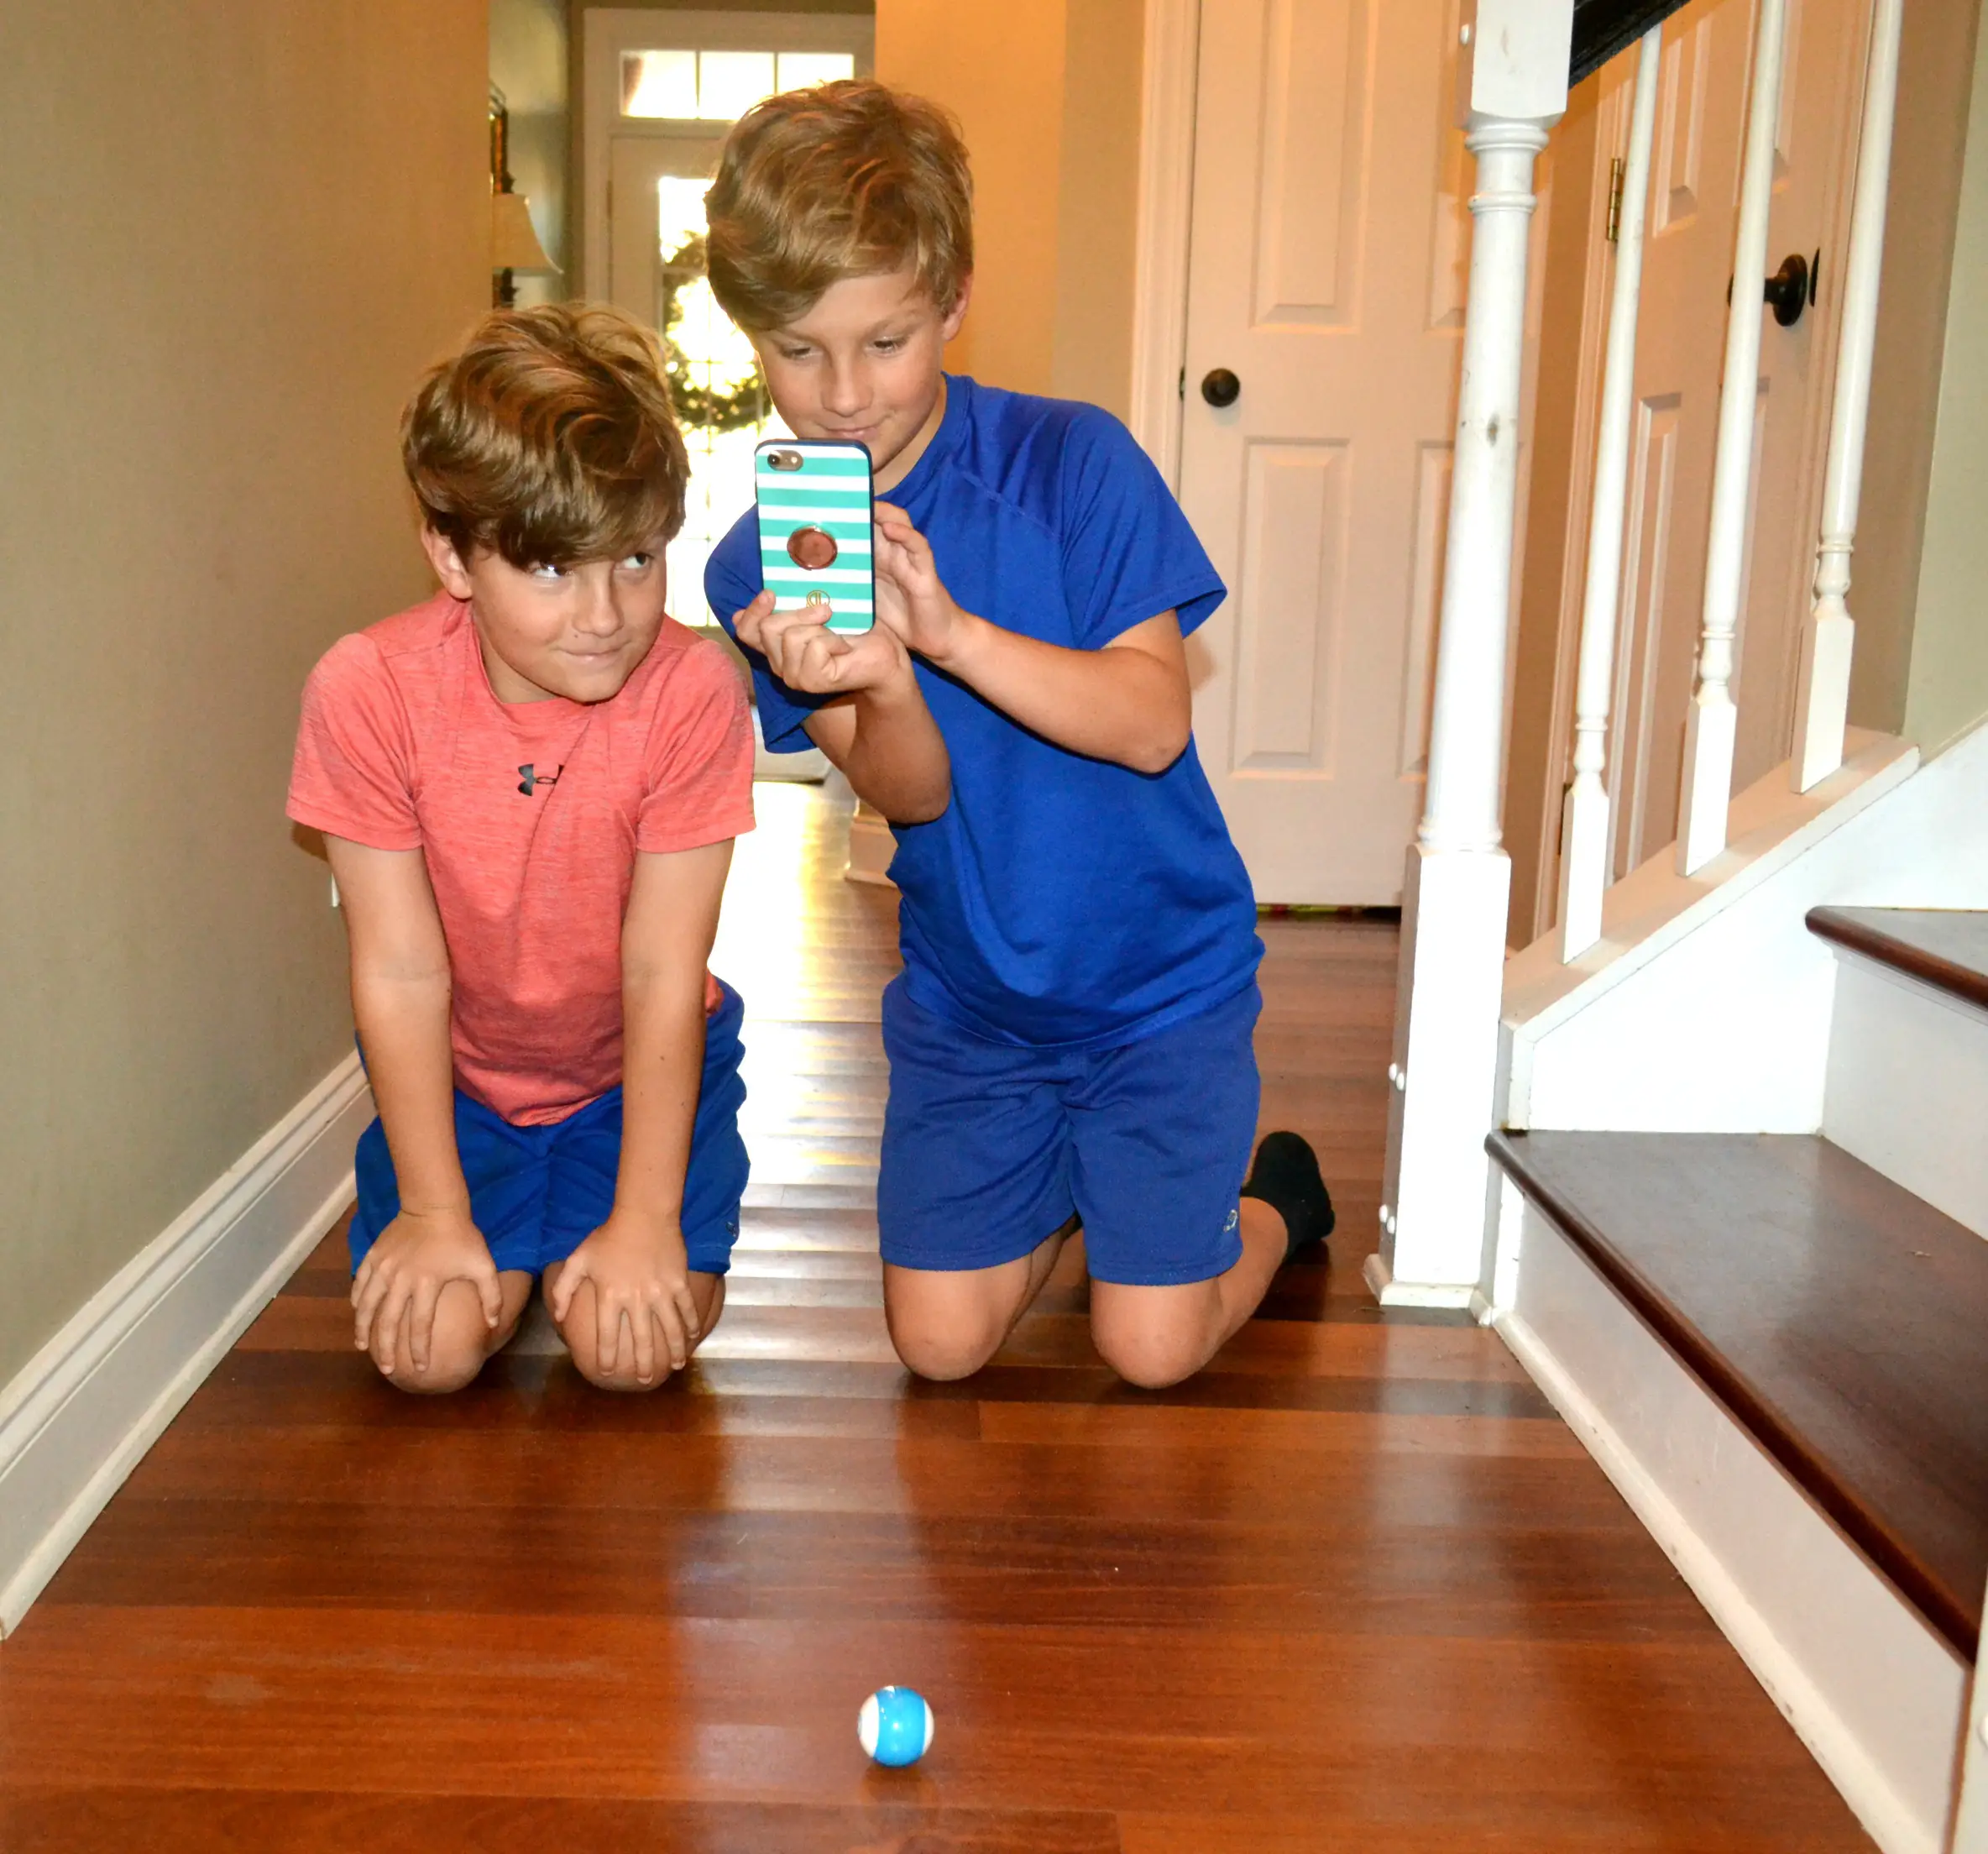 Sphero Mini STEAM robot is so much fun for kids. Makes coding and programming exciting.